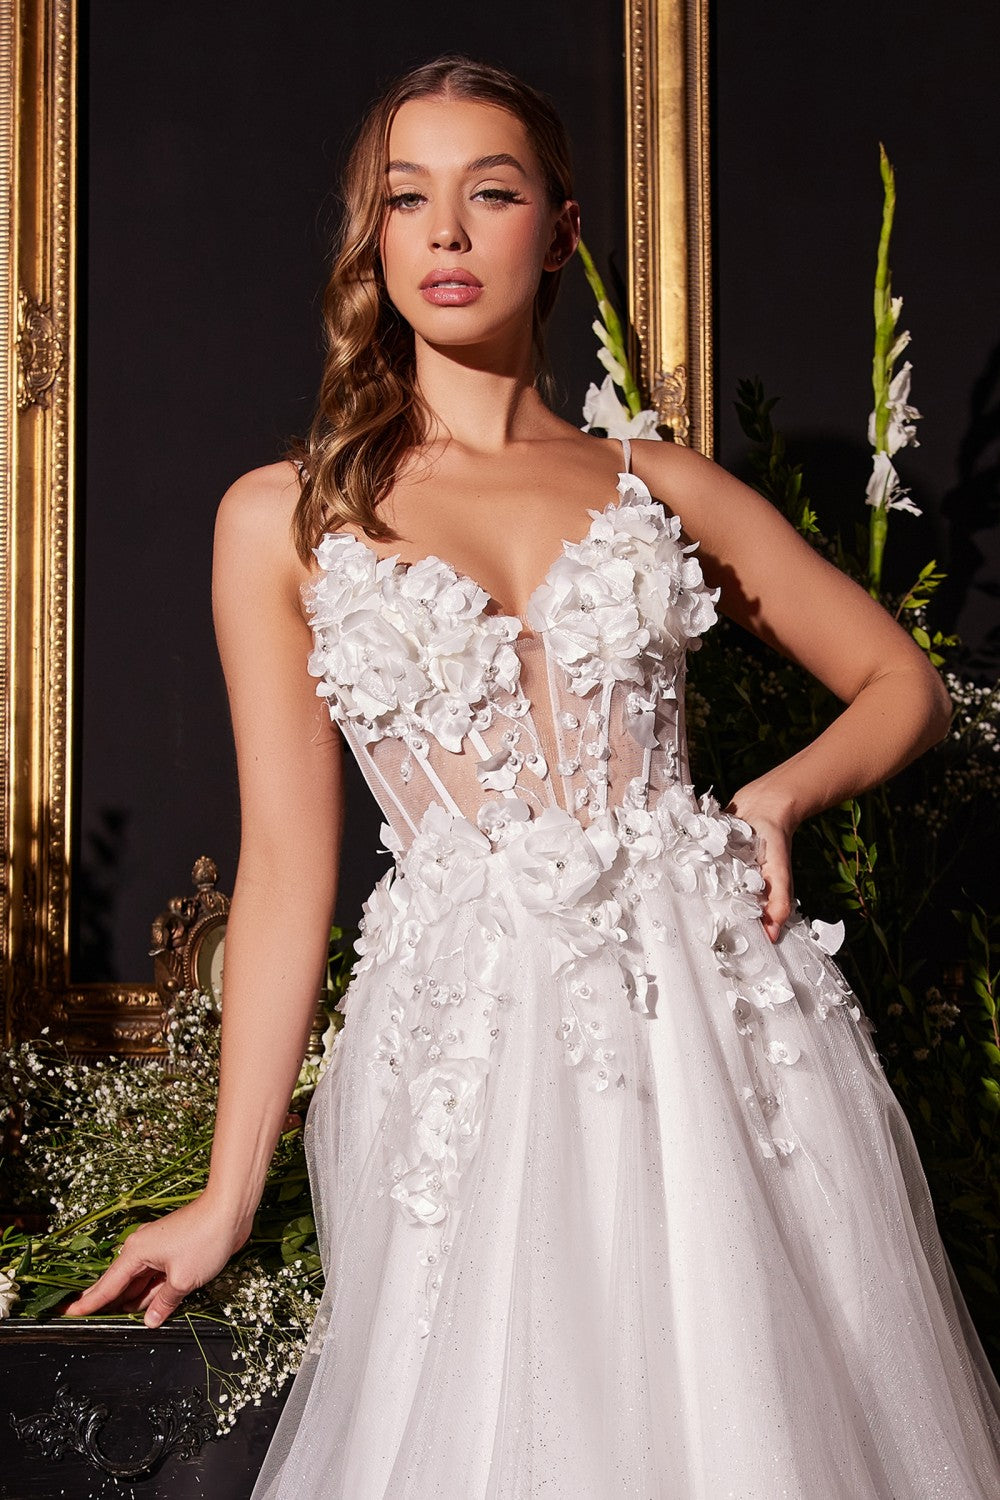 Off-White_2 Floral Applique A-line Bridal Gown CM321W - Women Evening Formal Gown - Special OccasionOff-White_2 Floral Applique A-line Bridal Gown CM321W - Women Evening Formal Gown - Special Occasion